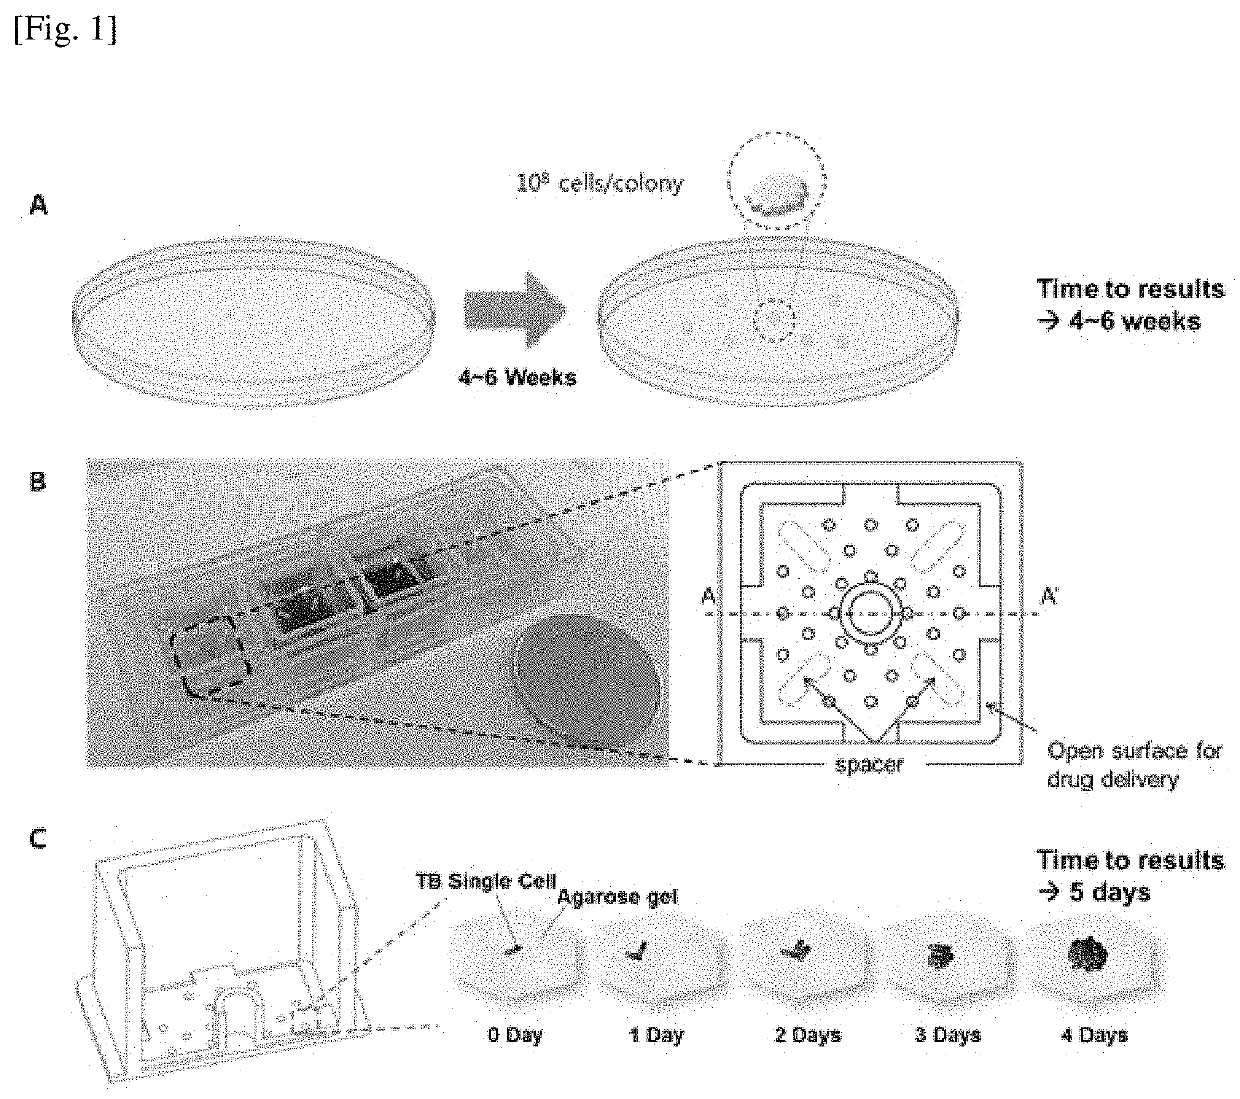 Bioactivity testing structure for single cell tracking using gelling agents